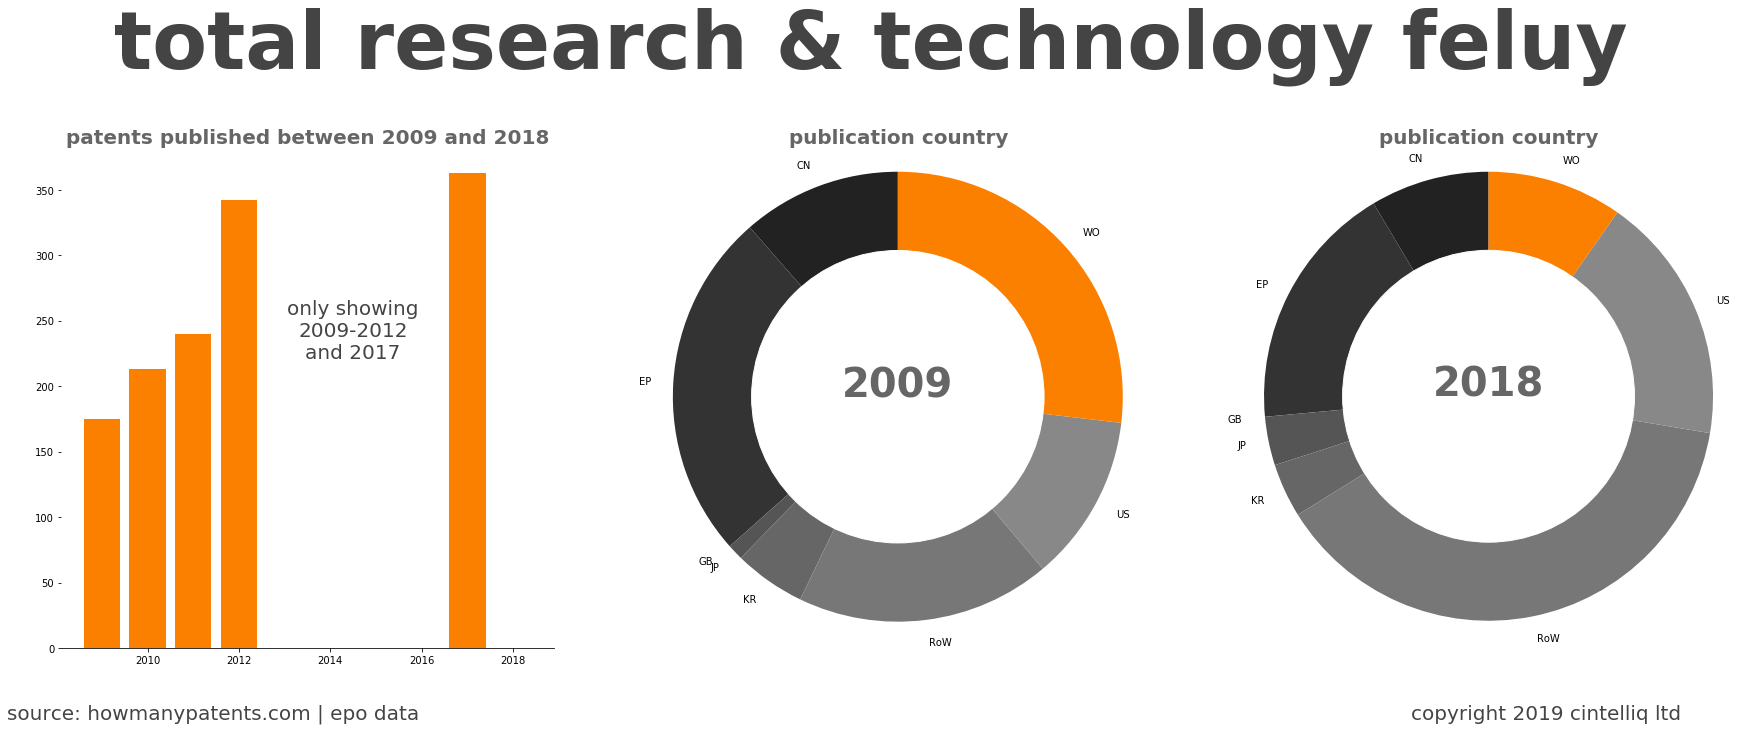 summary of patents for Total Research & Technology Feluy